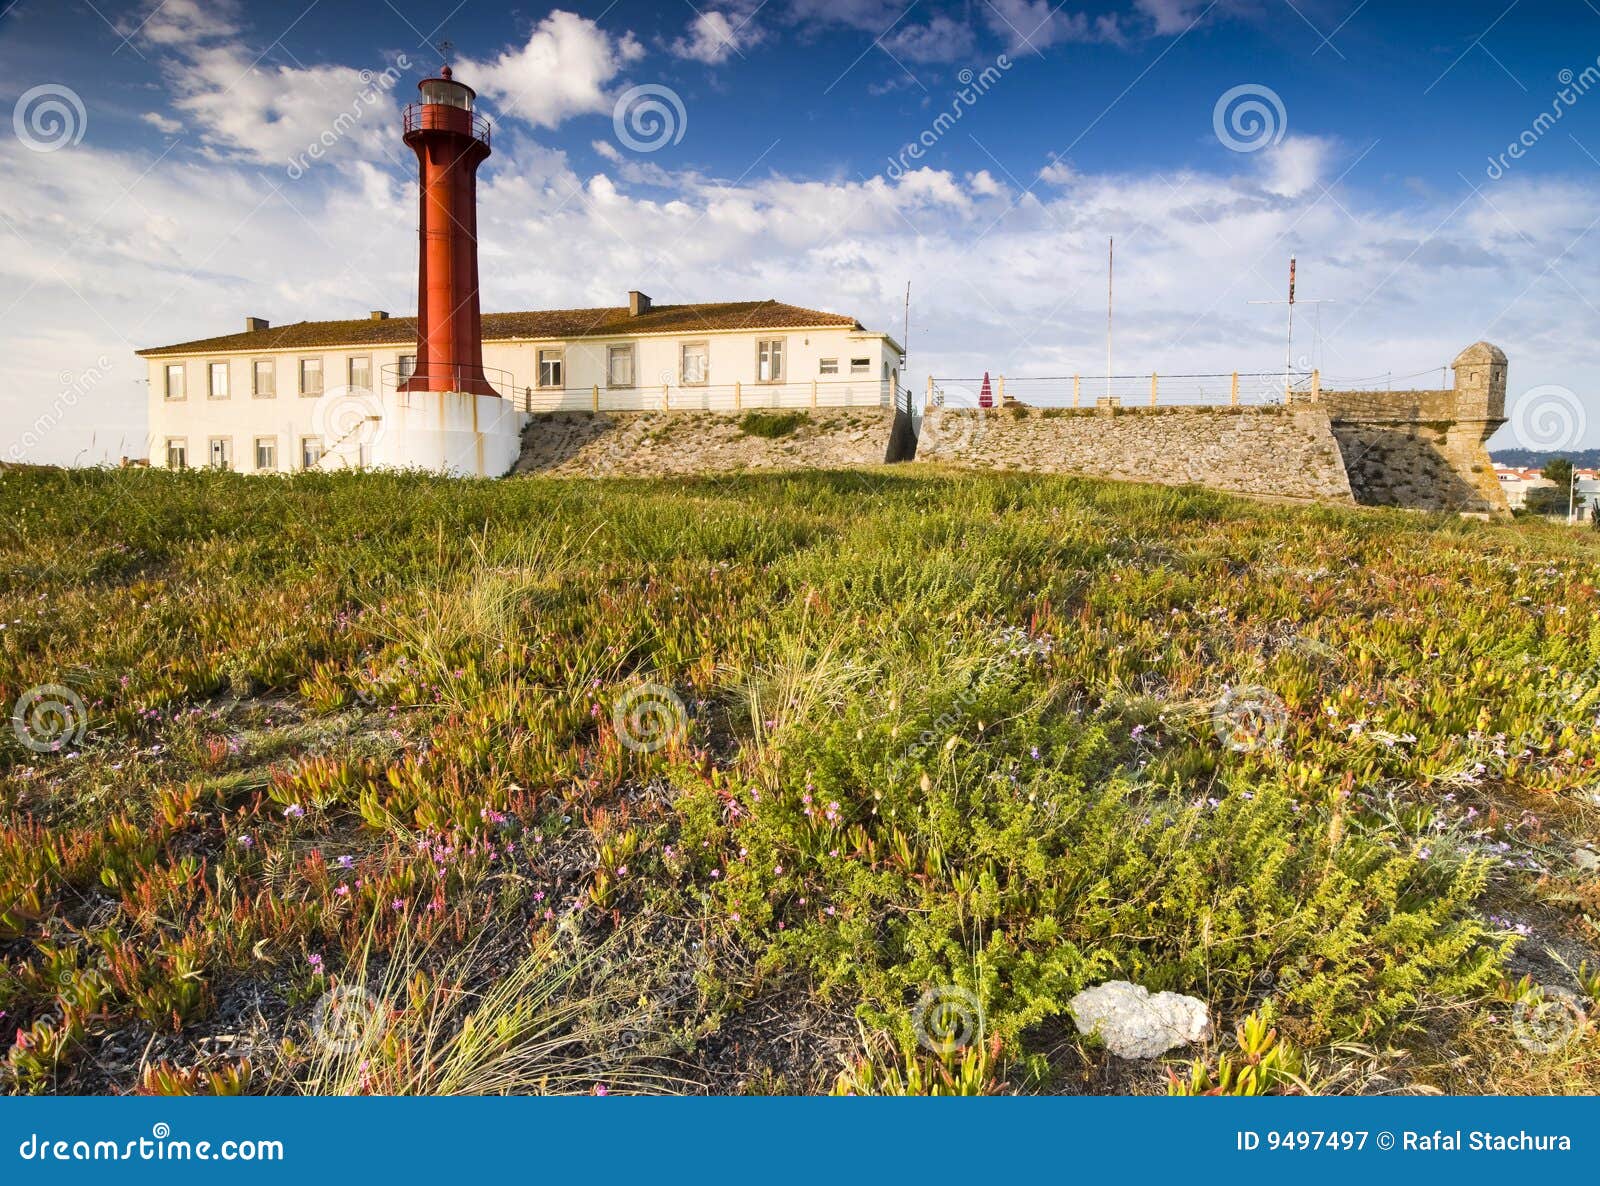 lighthouse in esposende, northern portugal